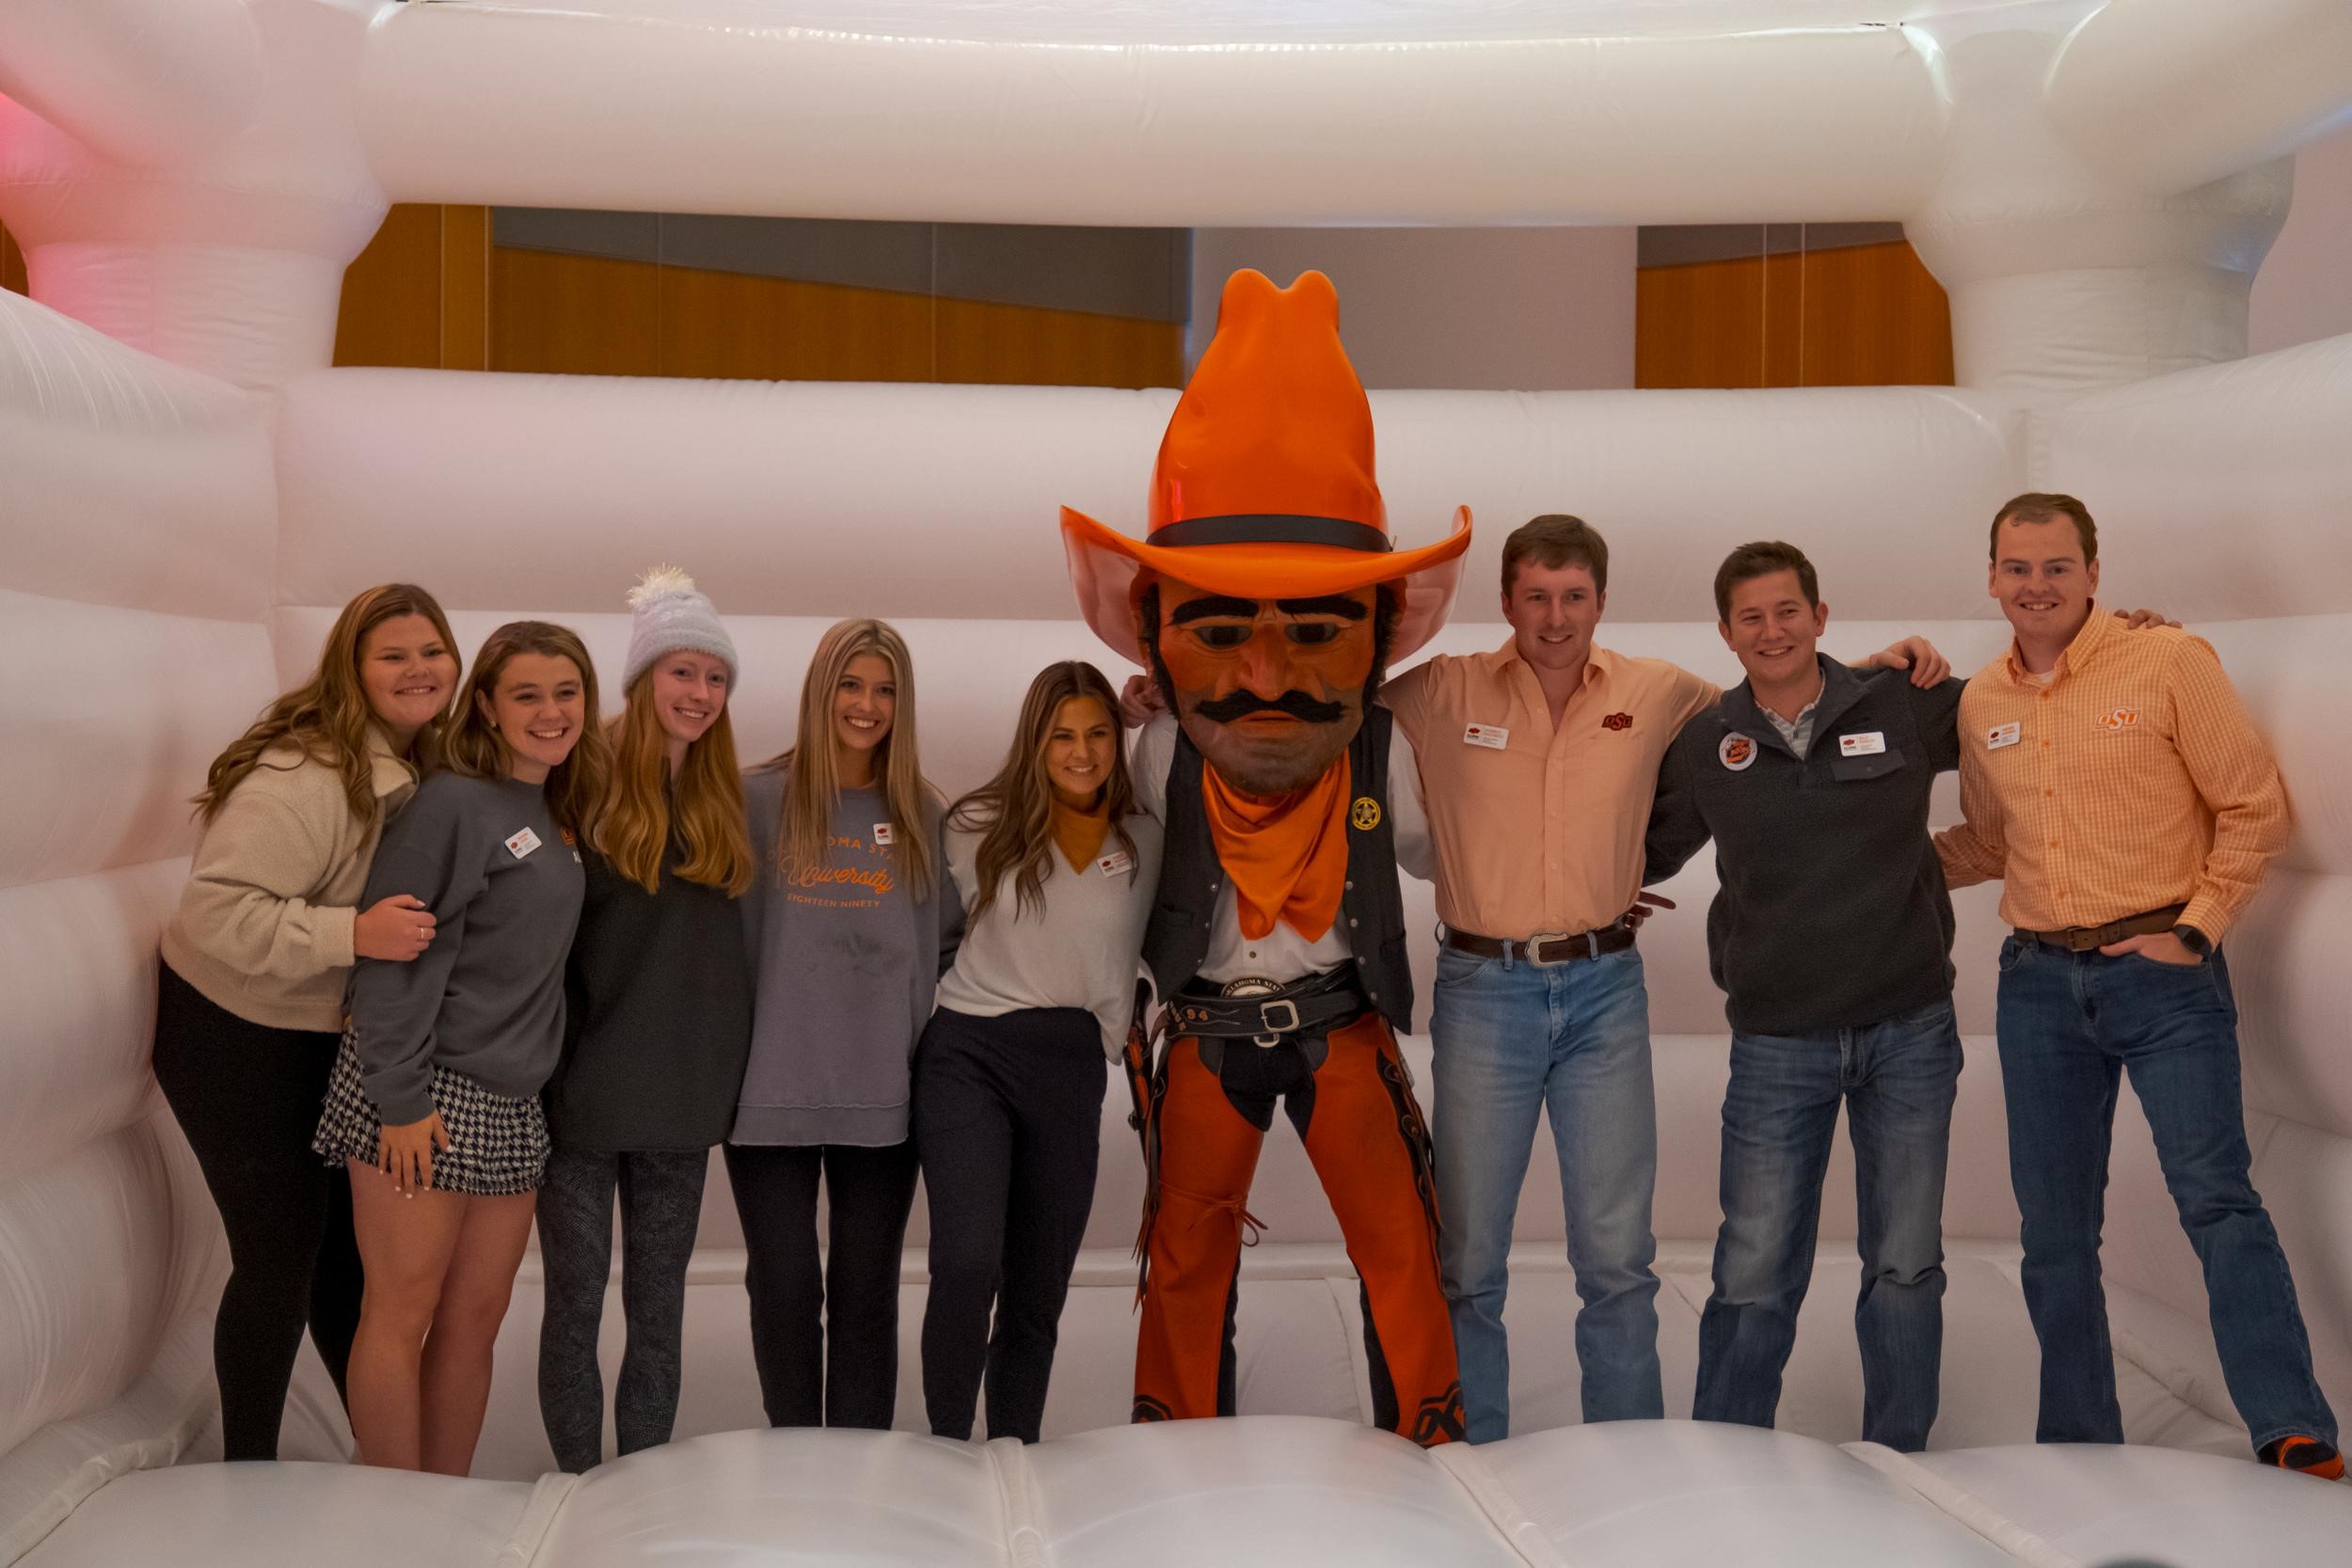 Pistol Pete stands with a group of college students in a bouncy house.